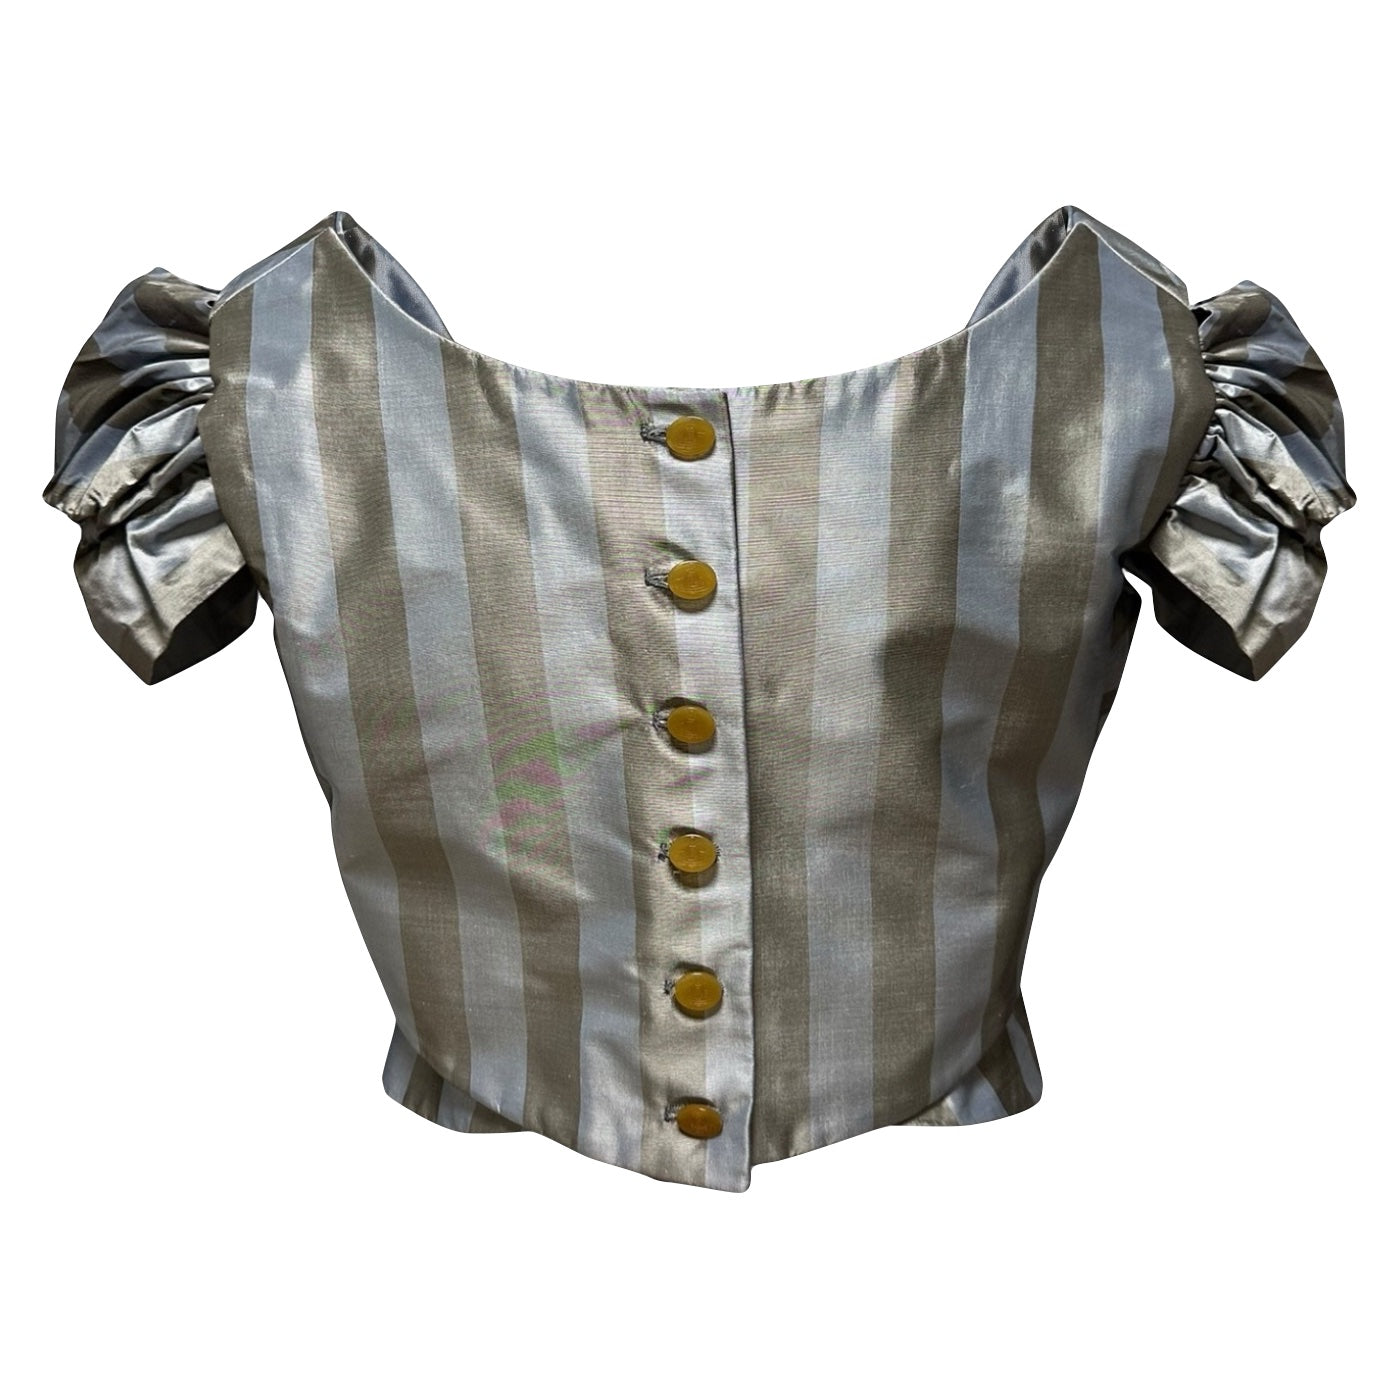 VIVIENNE WESTWOOD Spring Summer 1998 "Tied To The Mast" Striped Silk Corset